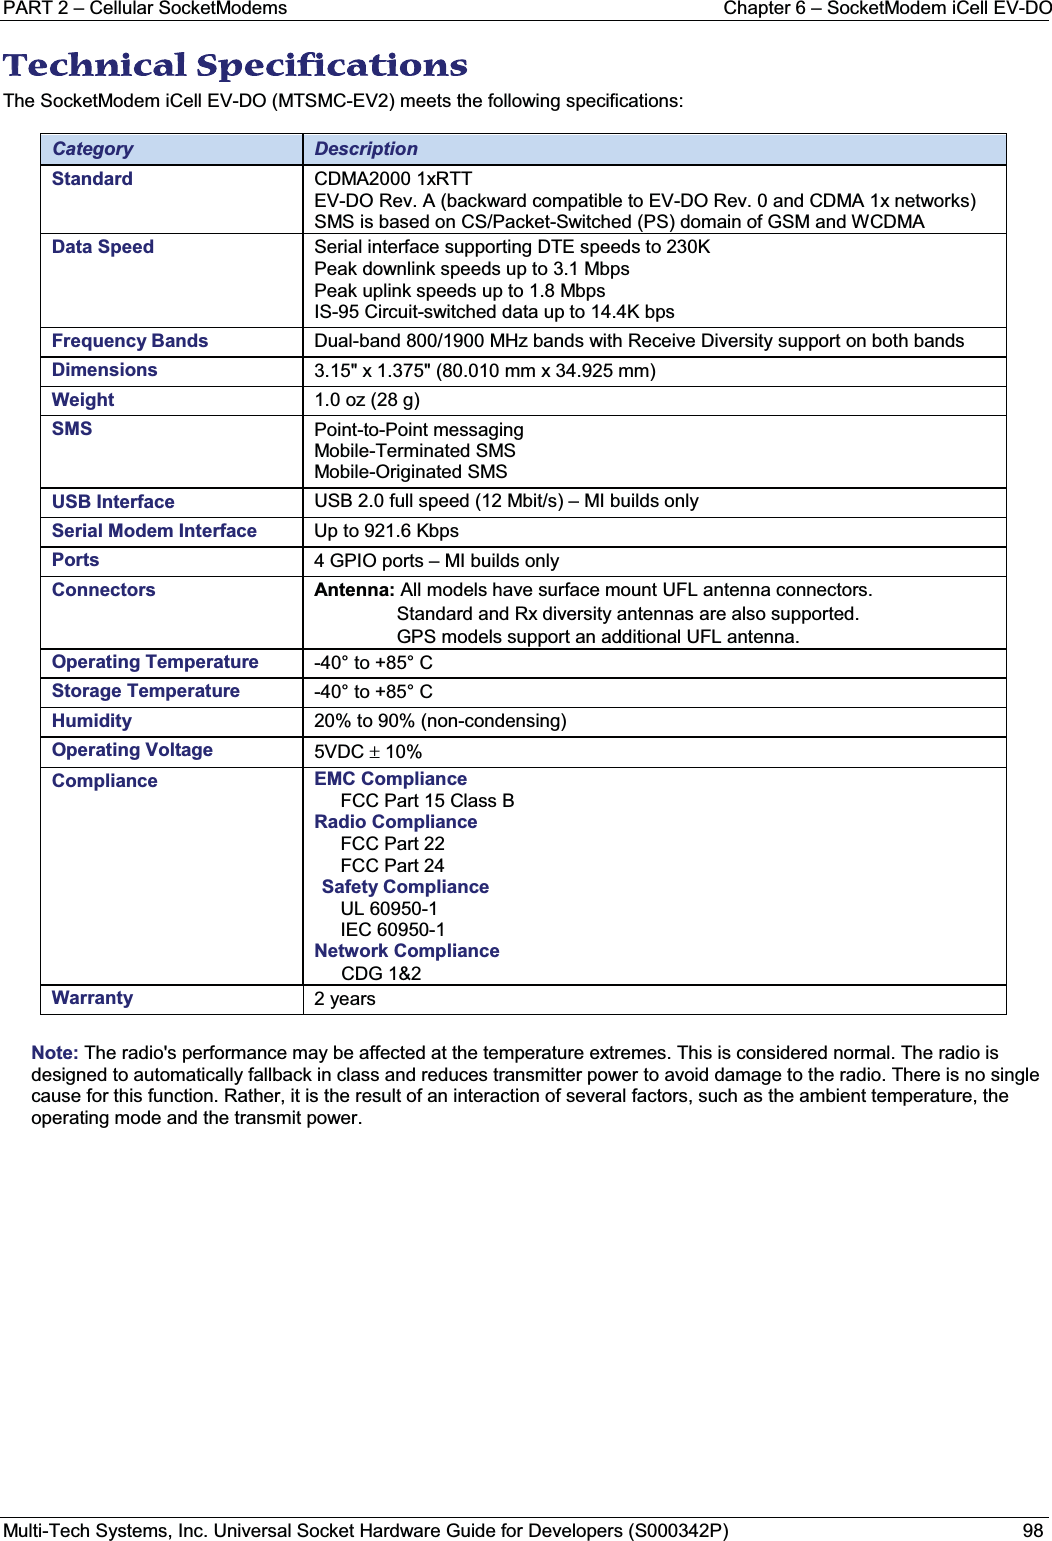 PART 2 – Cellular SocketModems Chapter 6 – SocketModem iCell EV-DOMulti-Tech Systems, Inc. Universal Socket Hardware Guide for Developers (S000342P) 98TTechnical Specifications The SocketModem iCell EV-DO (MTSMC-EV2) meets the following specifications: Category DescriptionStandard CDMA2000 1xRTTEV-DO Rev. A (backward compatible to EV-DO Rev. 0 and CDMA 1x networks)SMS is based on CS/Packet-Switched (PS) domain of GSM and WCDMAData Speed Serial interface supporting DTE speeds to 230KPeak downlink speeds up to 3.1 Mbps Peak uplink speeds up to 1.8 MbpsIS-95 Circuit-switched data up to 14.4K bpsFrequency Bands Dual-band 800/1900 MHz bands with Receive Diversity support on both bandsDimensions 3.15&quot; x 1.375&quot; (80.010 mm x 34.925 mm)  Weight 1.0 oz (28 g)SMS Point-to-Point messagingMobile-Terminated SMSMobile-Originated SMSUSB Interface USB 2.0 full speed (12 Mbit/s) – MI builds onlySerial Modem Interface Up to 921.6 KbpsPorts 4 GPIO ports – MI builds onlyConnectors Antenna: All models have surface mount UFL antenna connectors.Standard and Rx diversity antennas are also supported. GPS models support an additional UFL antenna.Operating Temperature -40° to +85° CStorage Temperature -40° to +85° C  Humidity 20% to 90% (non-condensing)Operating Voltage 5VDC r10%Compliance EMC ComplianceFCC Part 15 Class BRadio ComplianceFCC Part 22FCC Part 24Safety ComplianceUL 60950-1IEC 60950-1Network Compliance CDG 1&amp;2Warranty 2 years Note: The radio&apos;s performance may be affected at the temperature extremes. This is considered normal. The radio is designed to automatically fallback in class and reduces transmitter power to avoid damage to the radio. There is no single cause for this function. Rather, it is the result of an interaction of several factors, such as the ambient temperature, the operating mode and the transmit power.